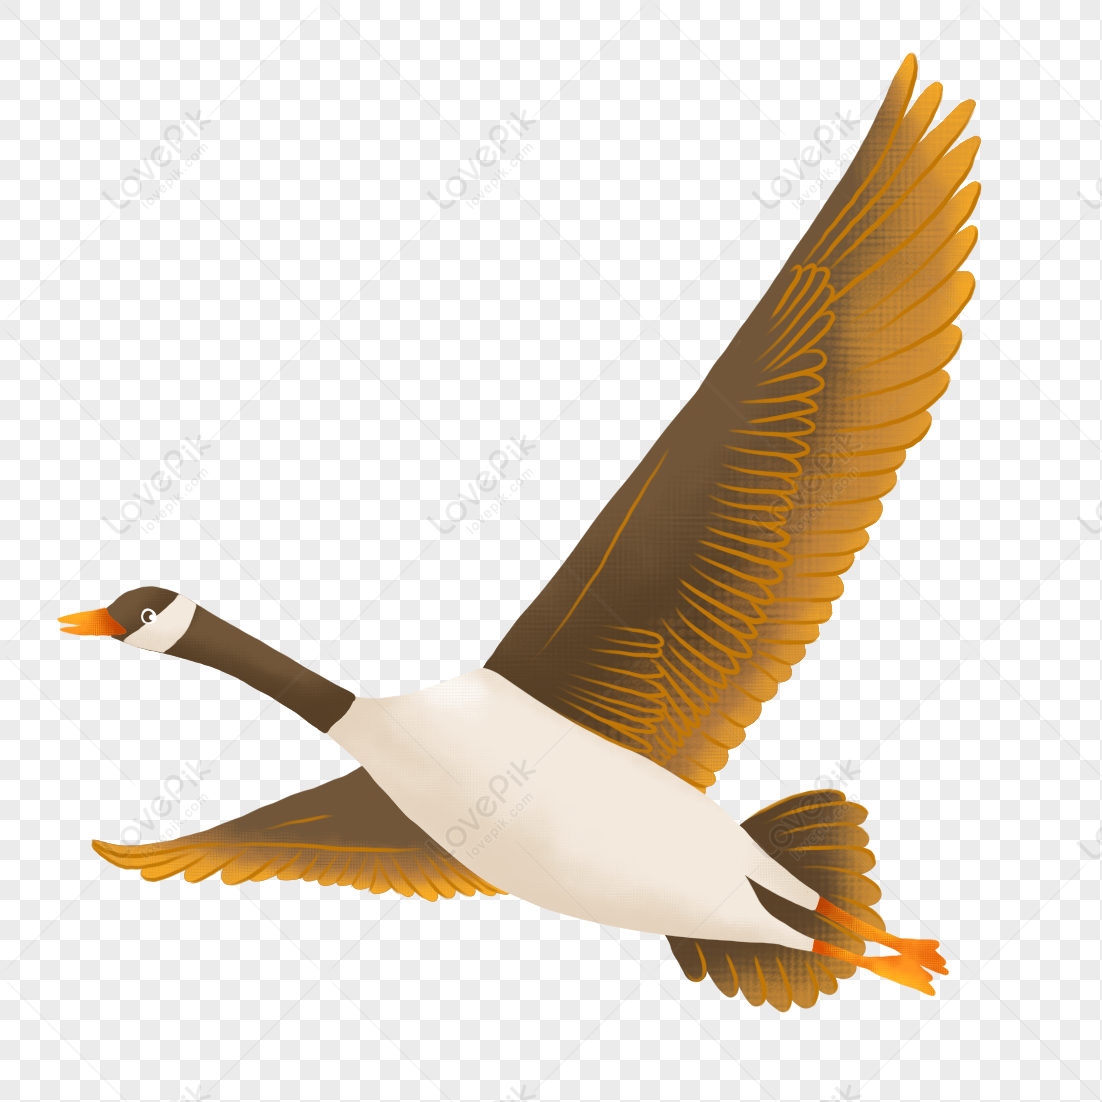 Cartoon Geese PNG Picture And Clipart Image For Free Download - Lovepik |  401544125